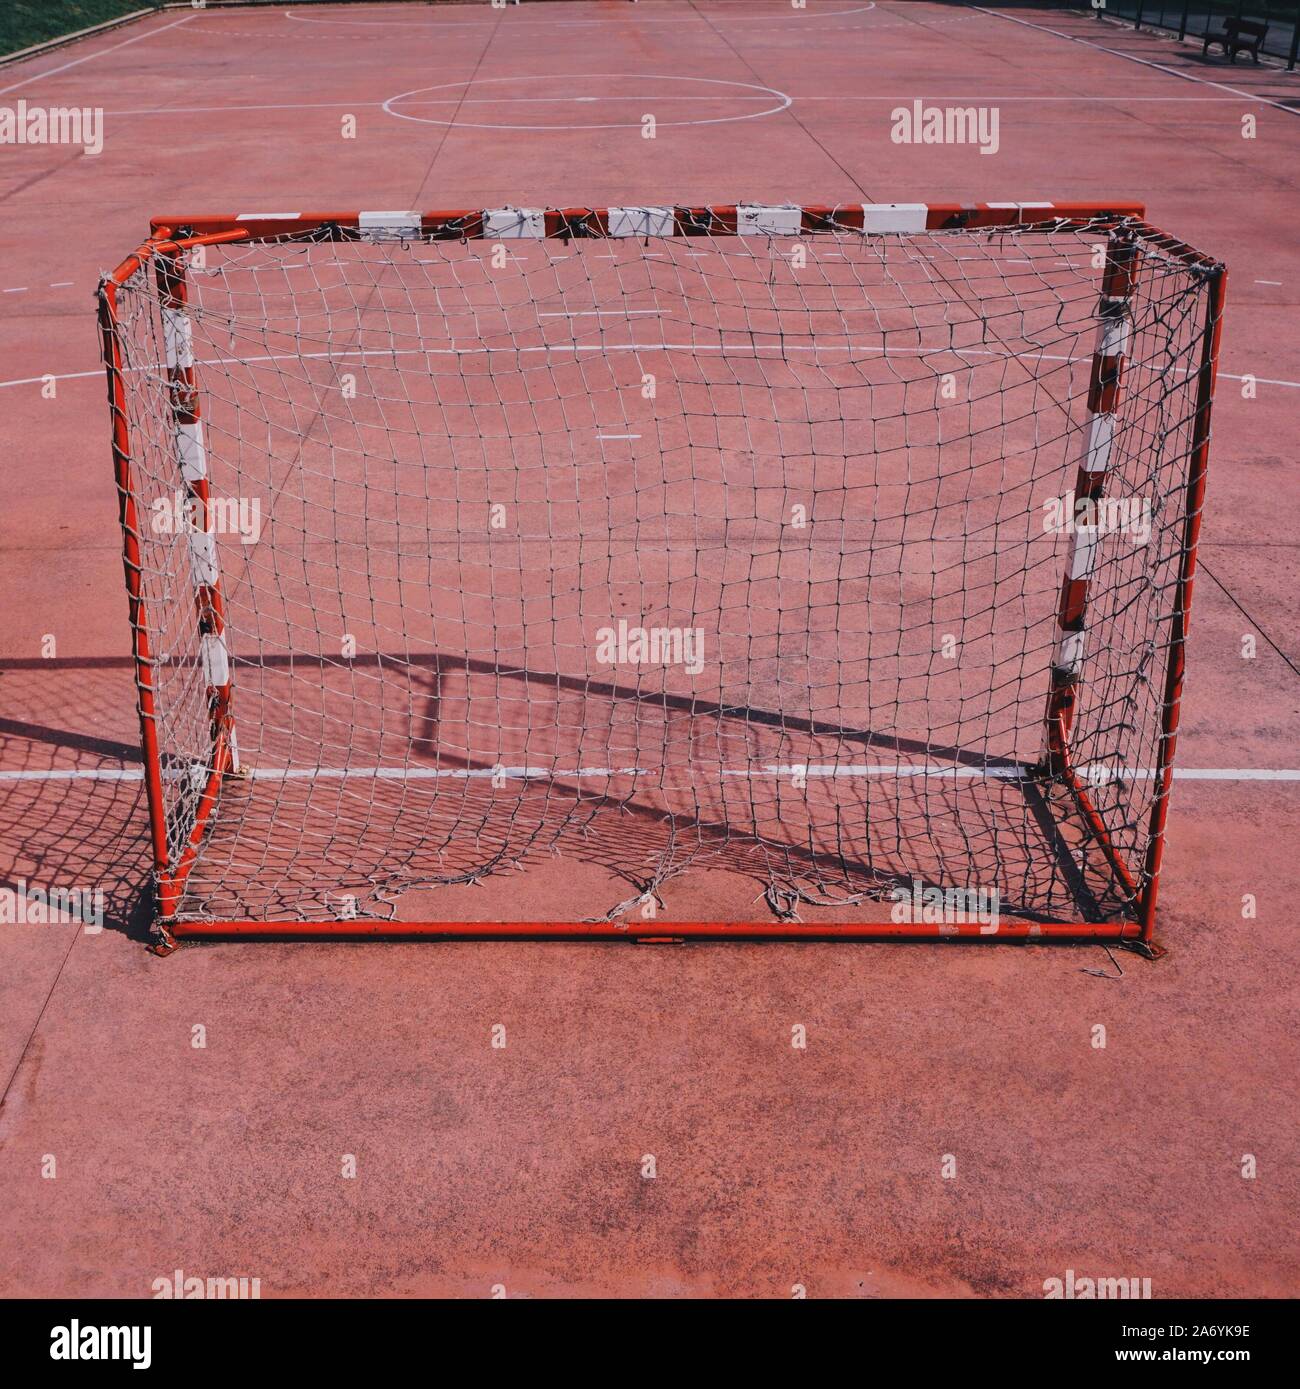 soccer goal sports equipment on the red field on the street Stock Photo